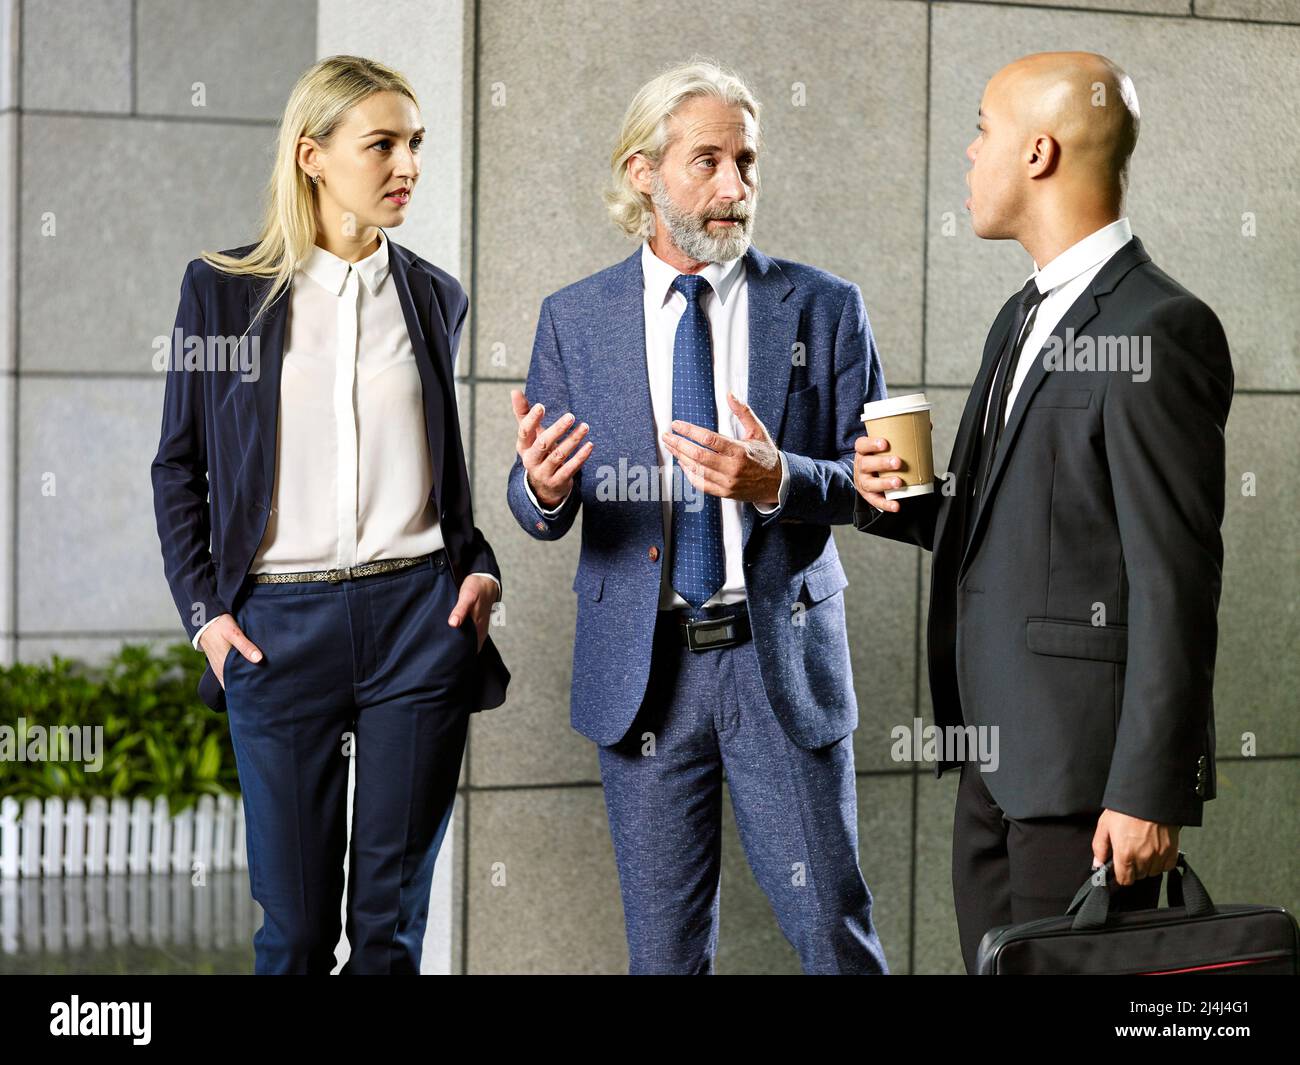 multiethnic business people commuters standing in modern office building talking conversing Stock Photo